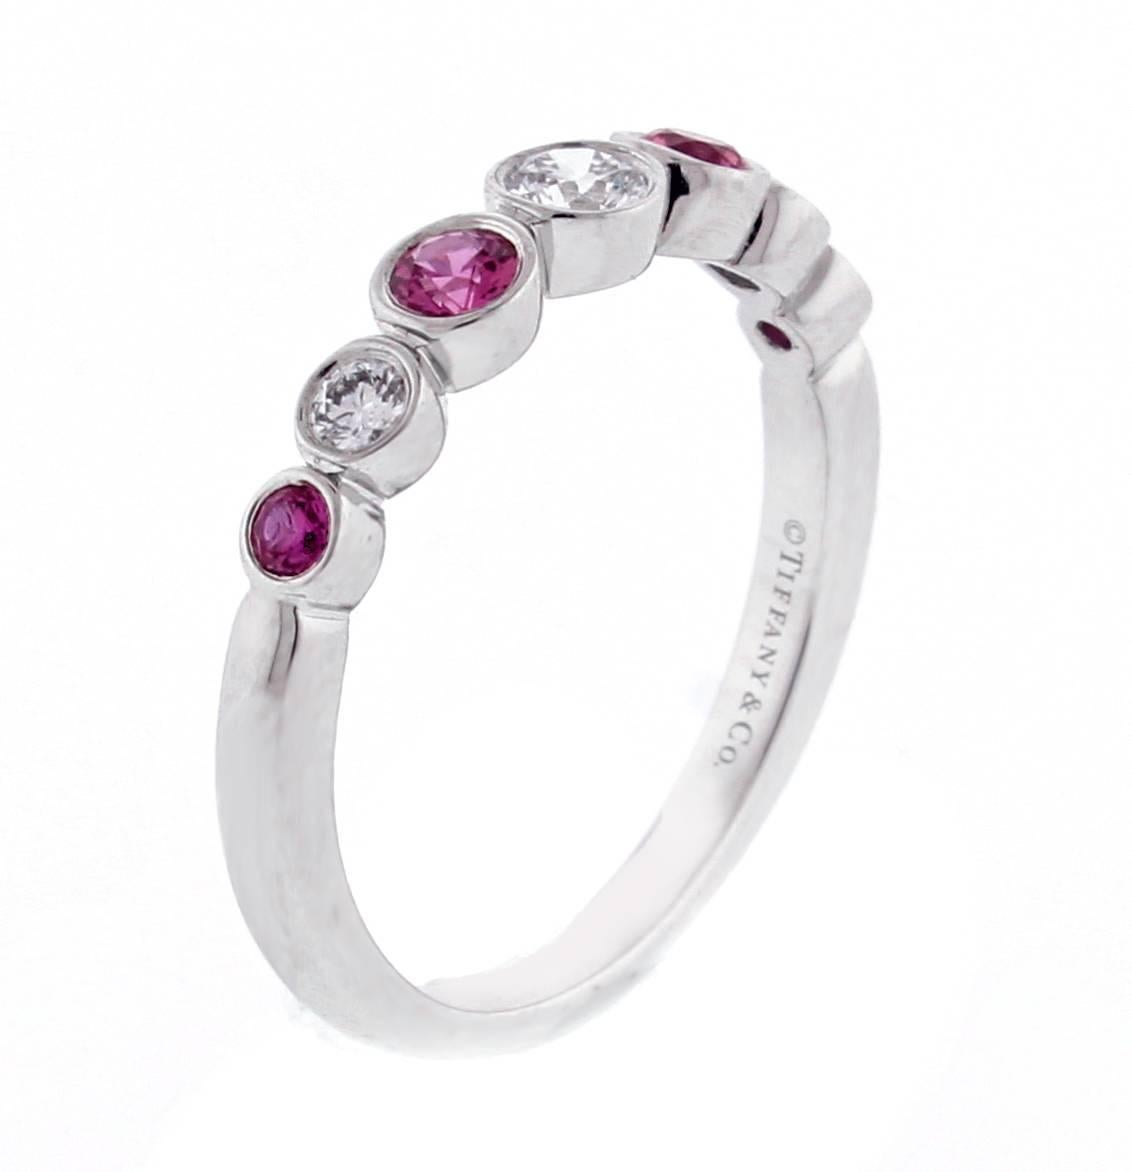 From Tiffany and Co.'s Jazz  collection, a pink sapphire and diamond Jazz ring. The  platinum ring consists of three brilliant diamonds weighing  approximately .35 carats and 4 pink sapphires weighing .40 carats, size 5.5, adjustable. This is a new